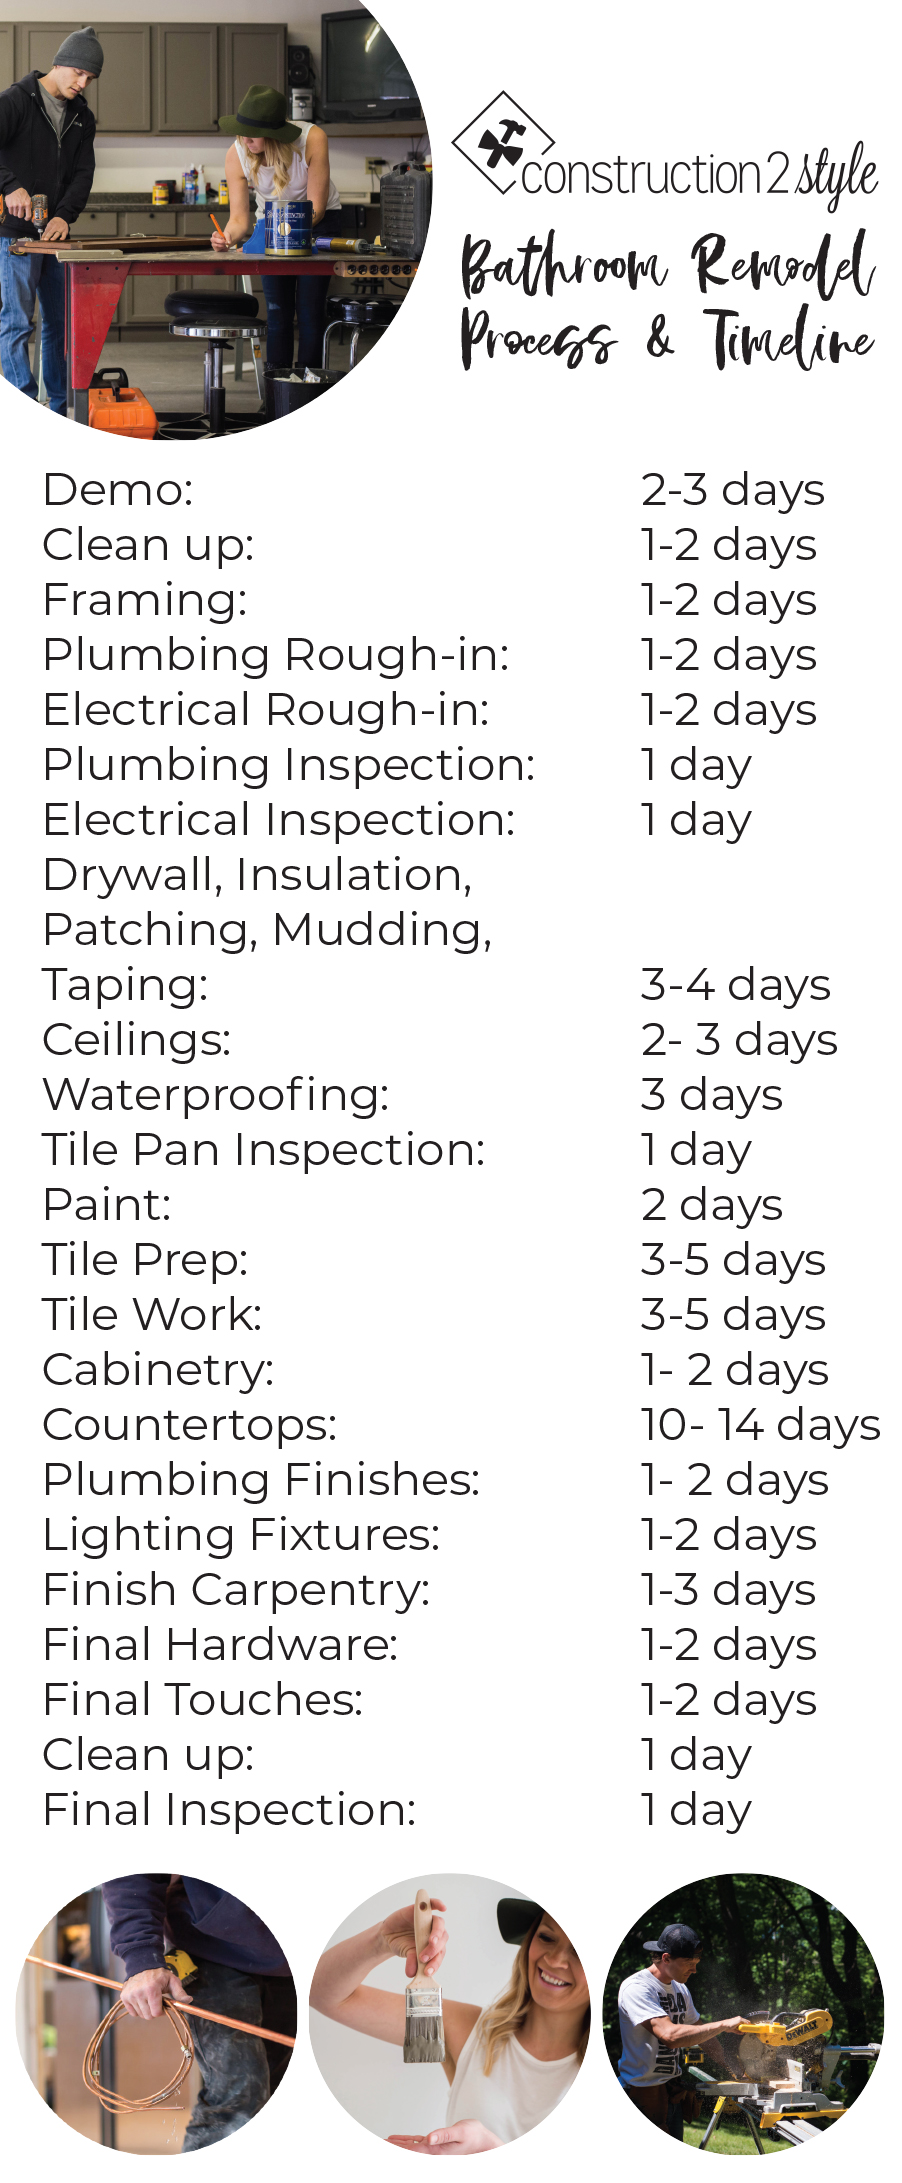 Bathroom Remodel Process and Timeline | construction2style